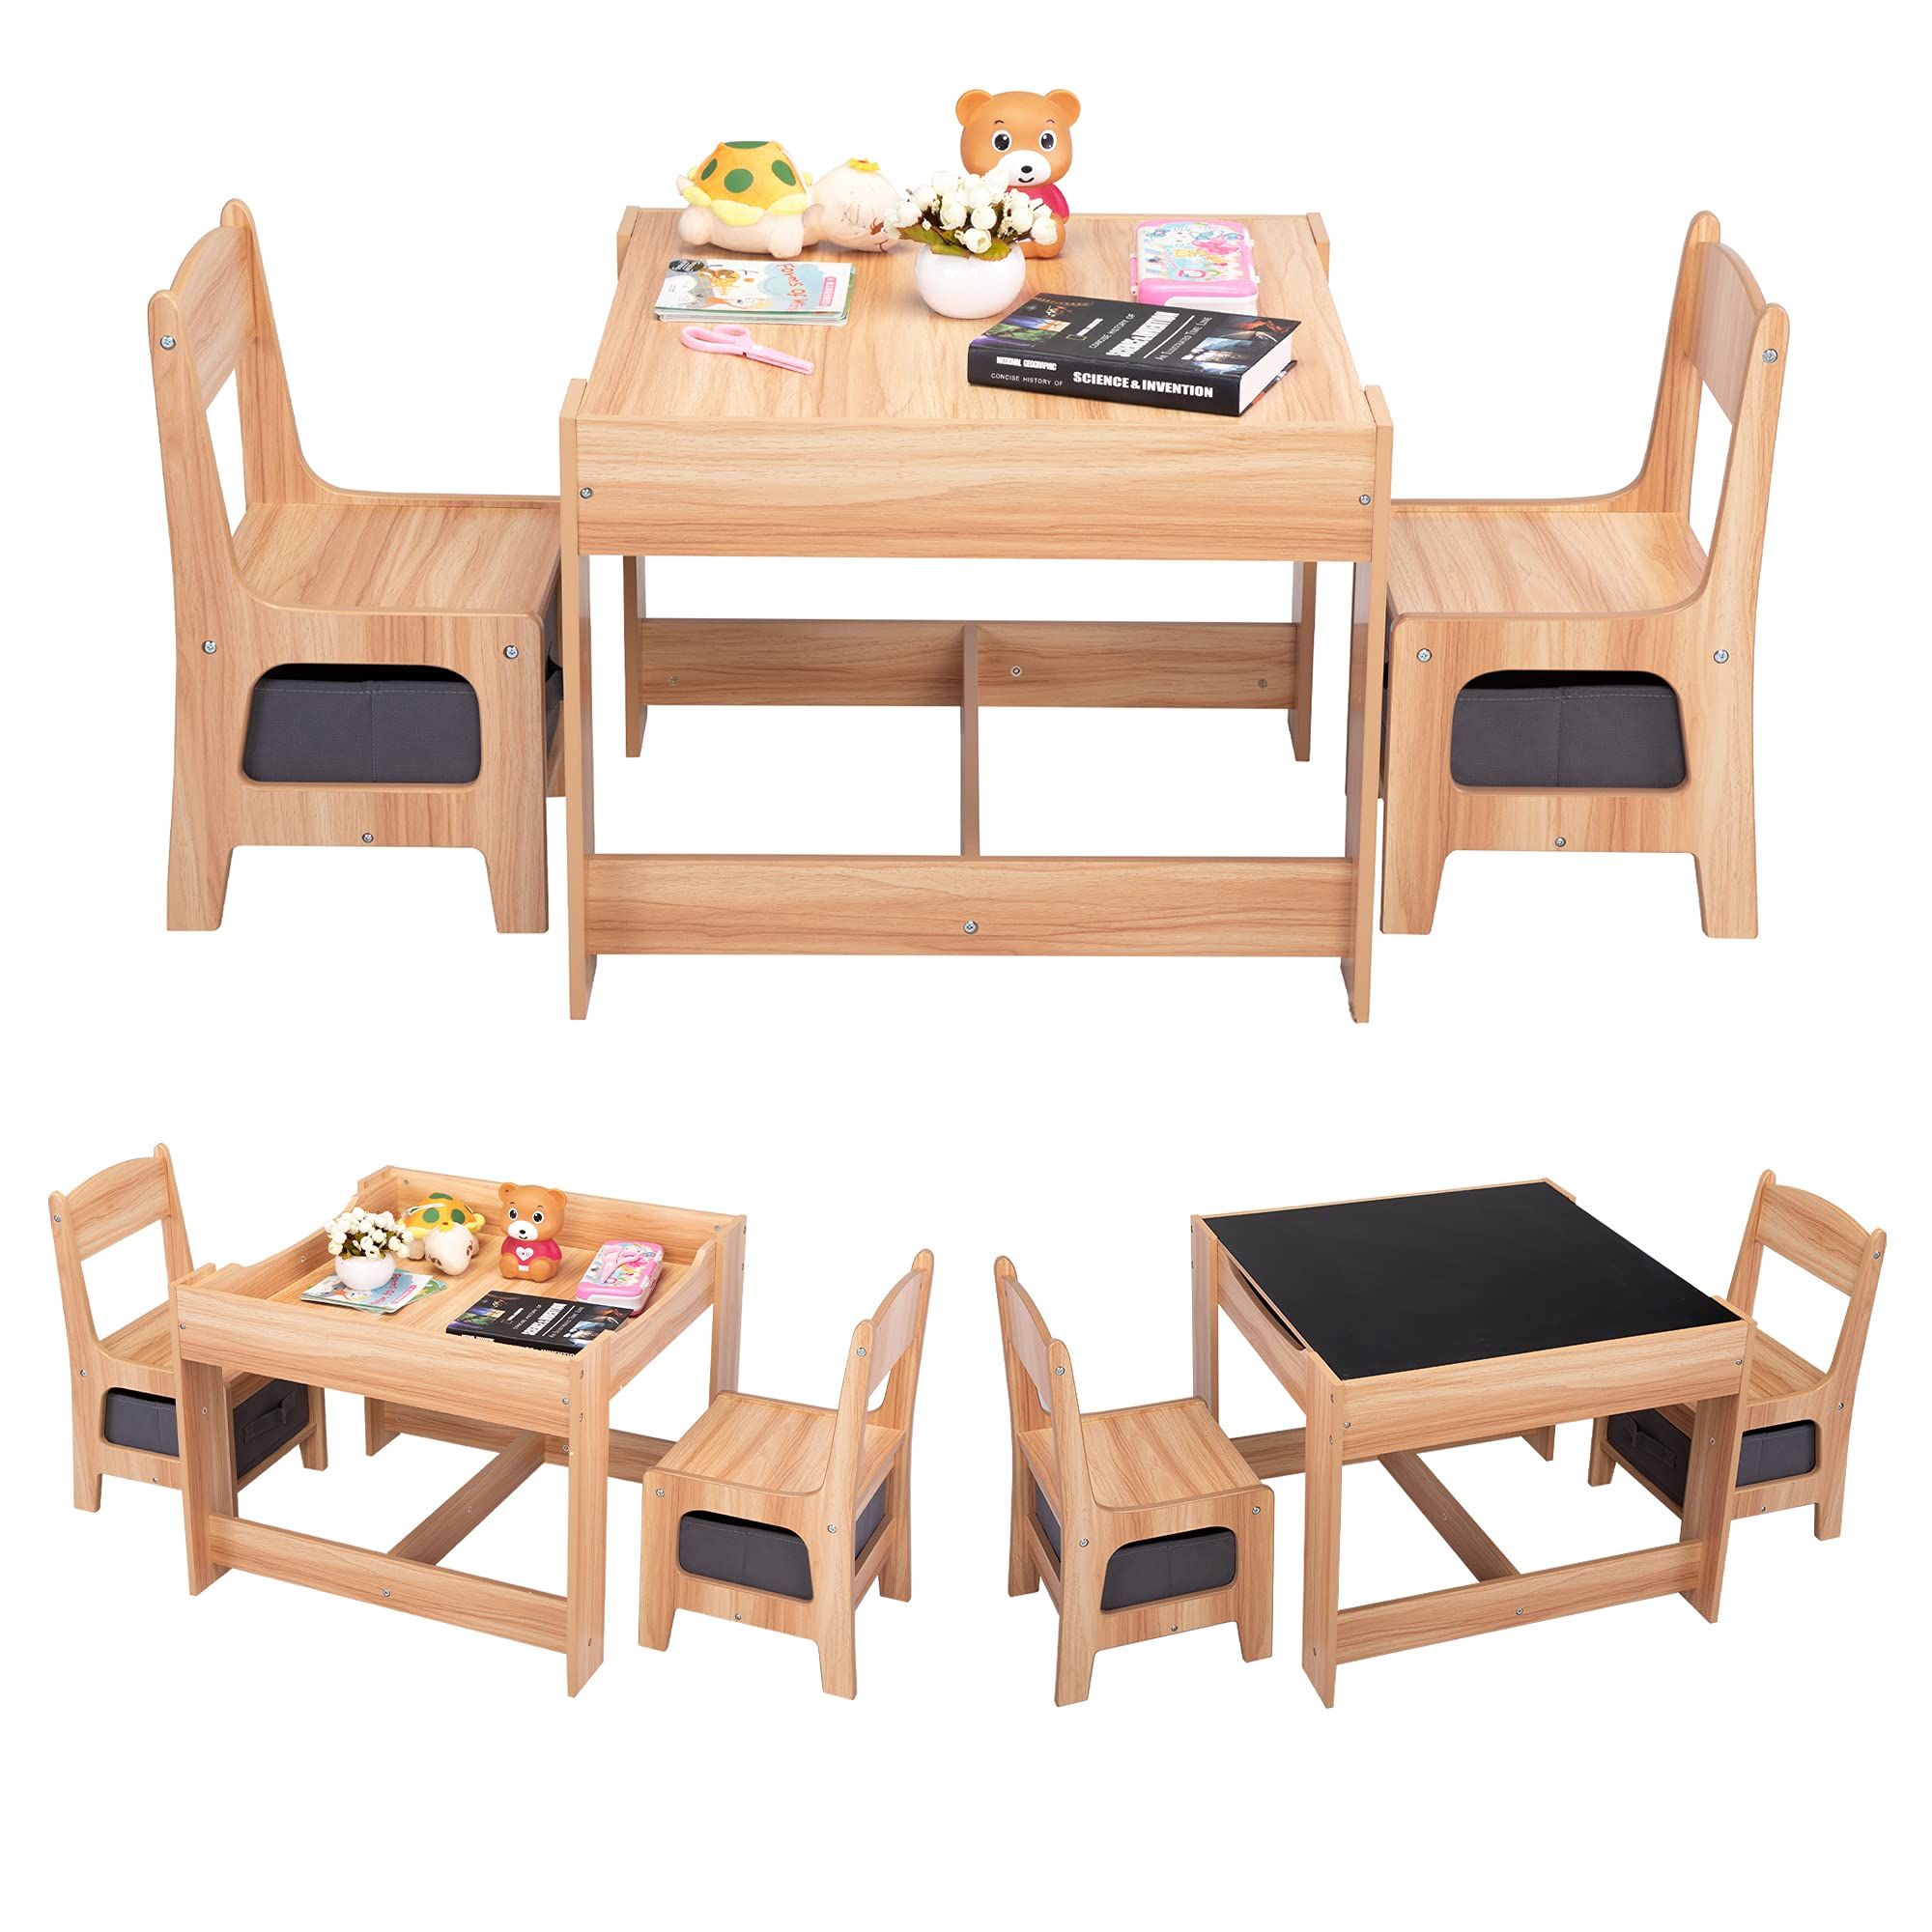 The Ultimate Guide to Choosing the Perfect Children’s Activity Table and Chairs